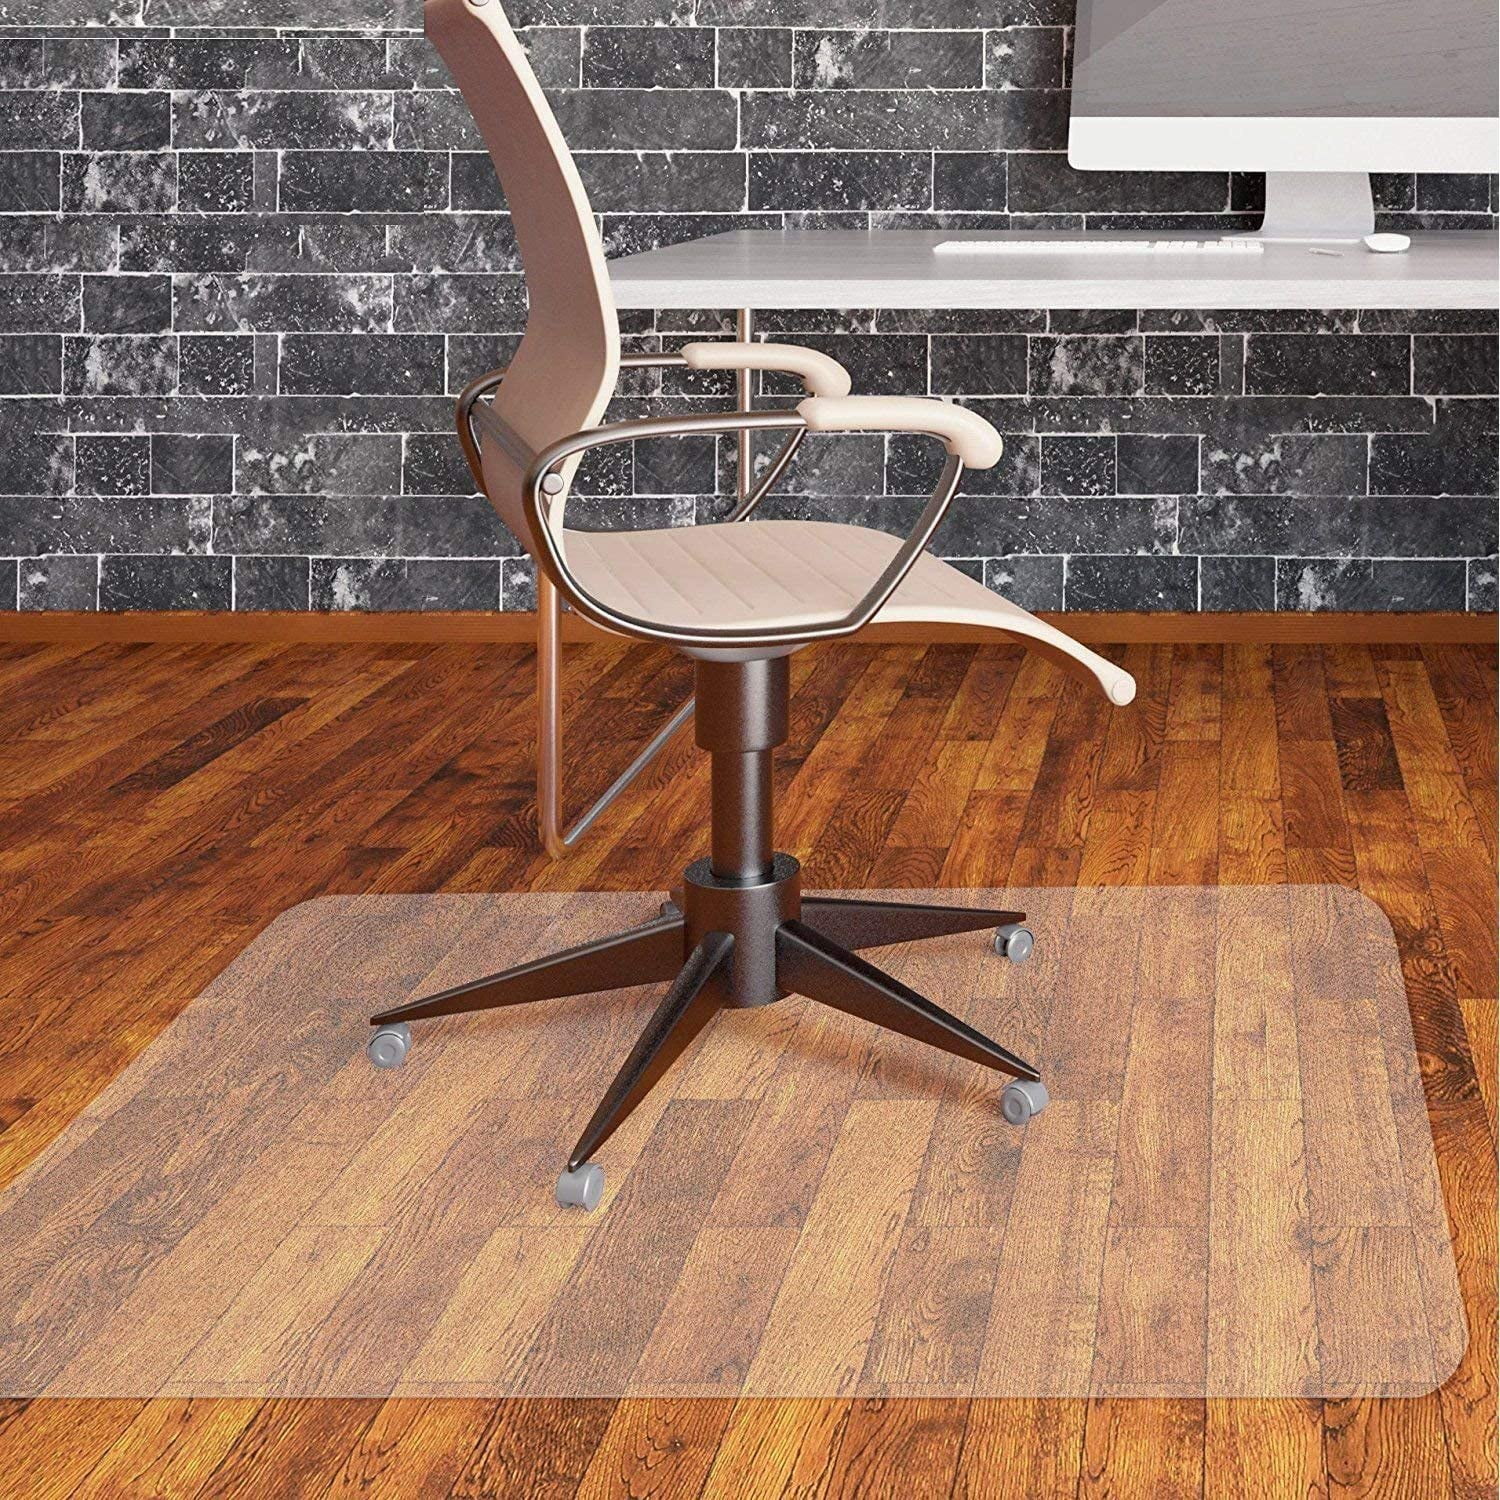 Chair Mat for Hardwood Floor Floor Mats for Computer Desk 36 x 48 Large Office Chair Mat for Hardwood and Tile Floor Wood/Tile Protection Mat for Office & Home Office Chair Mat 